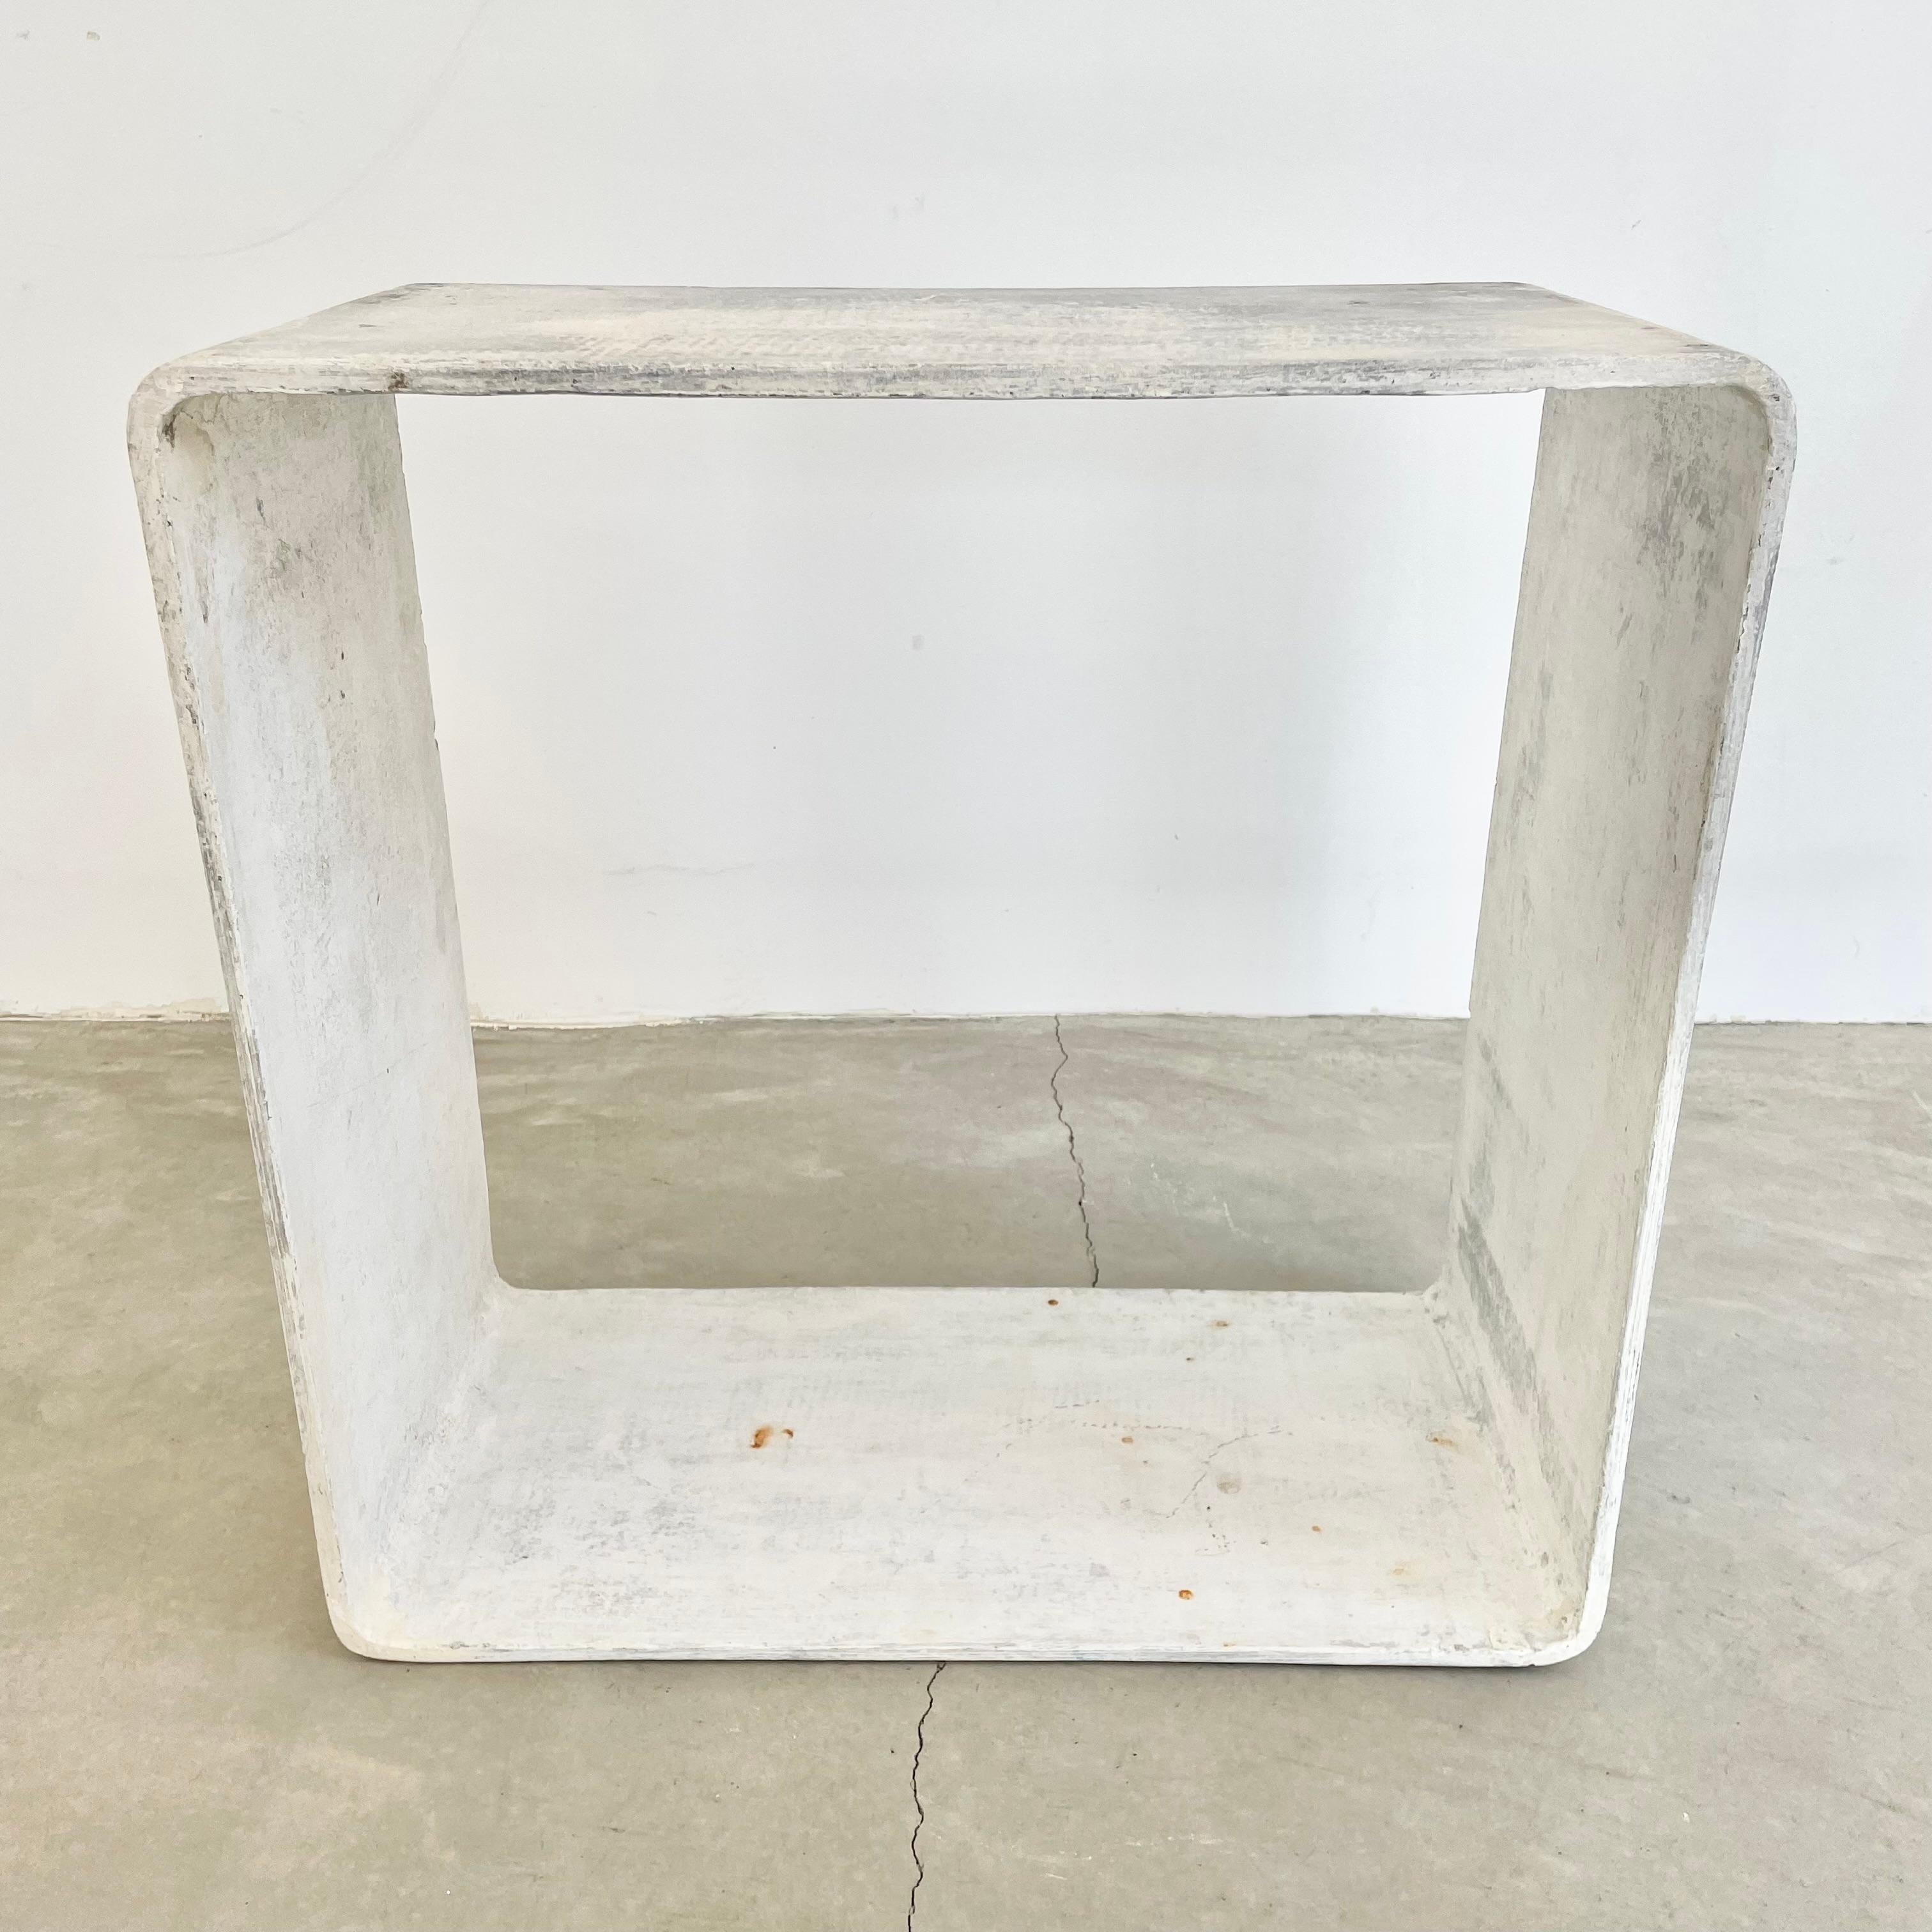 Willy Guhl Concrete Cube Side Table, 1960s Switzerland For Sale 2